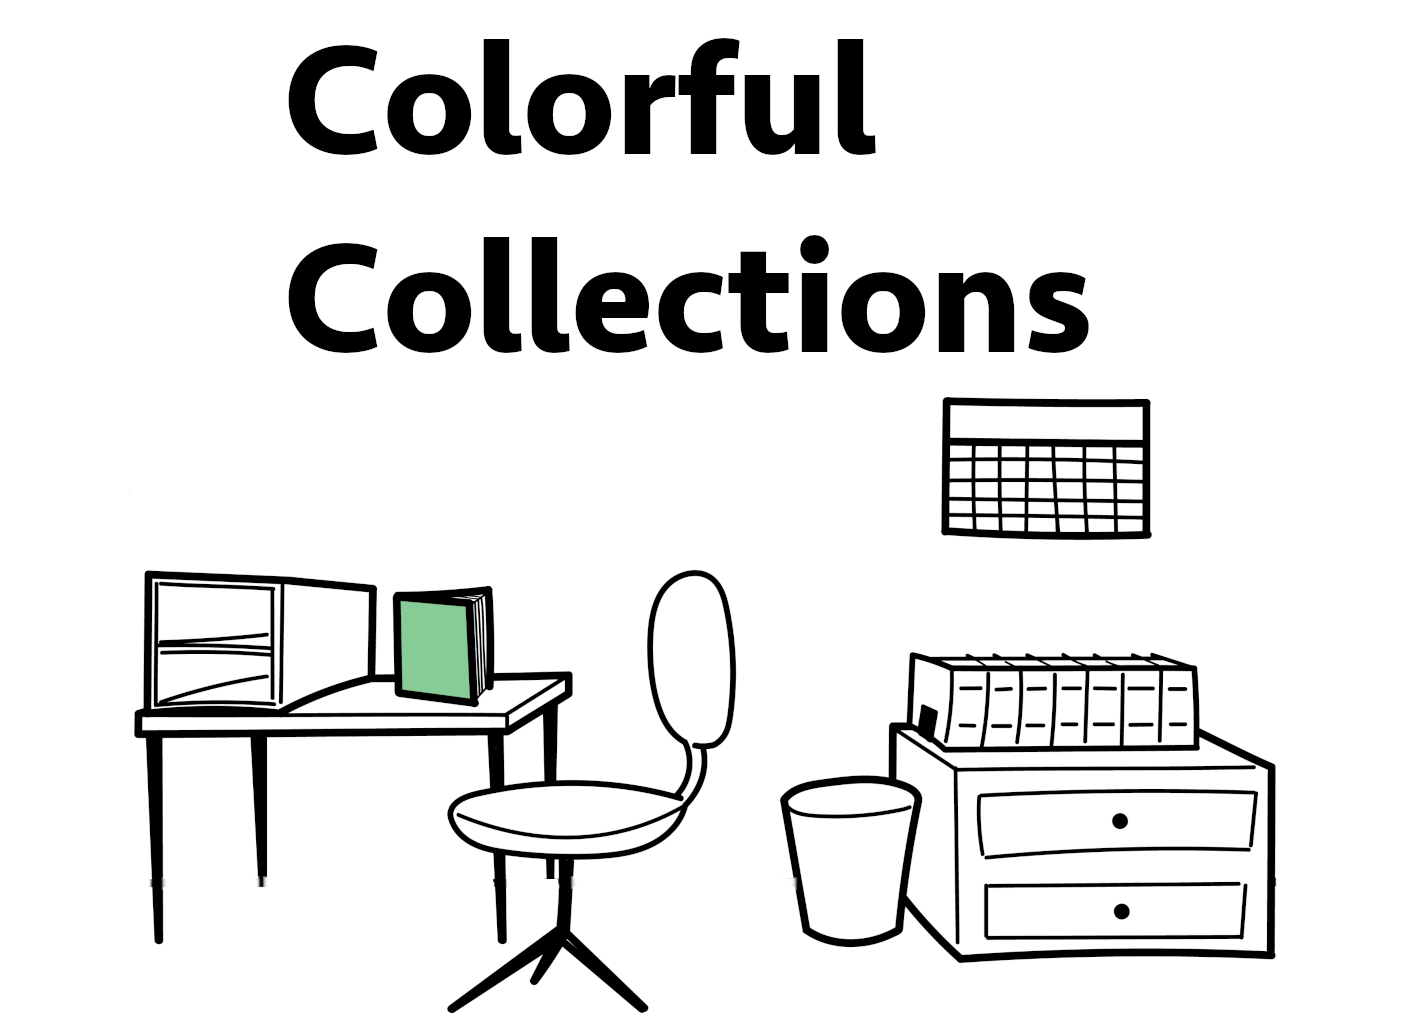 Colorful Collections